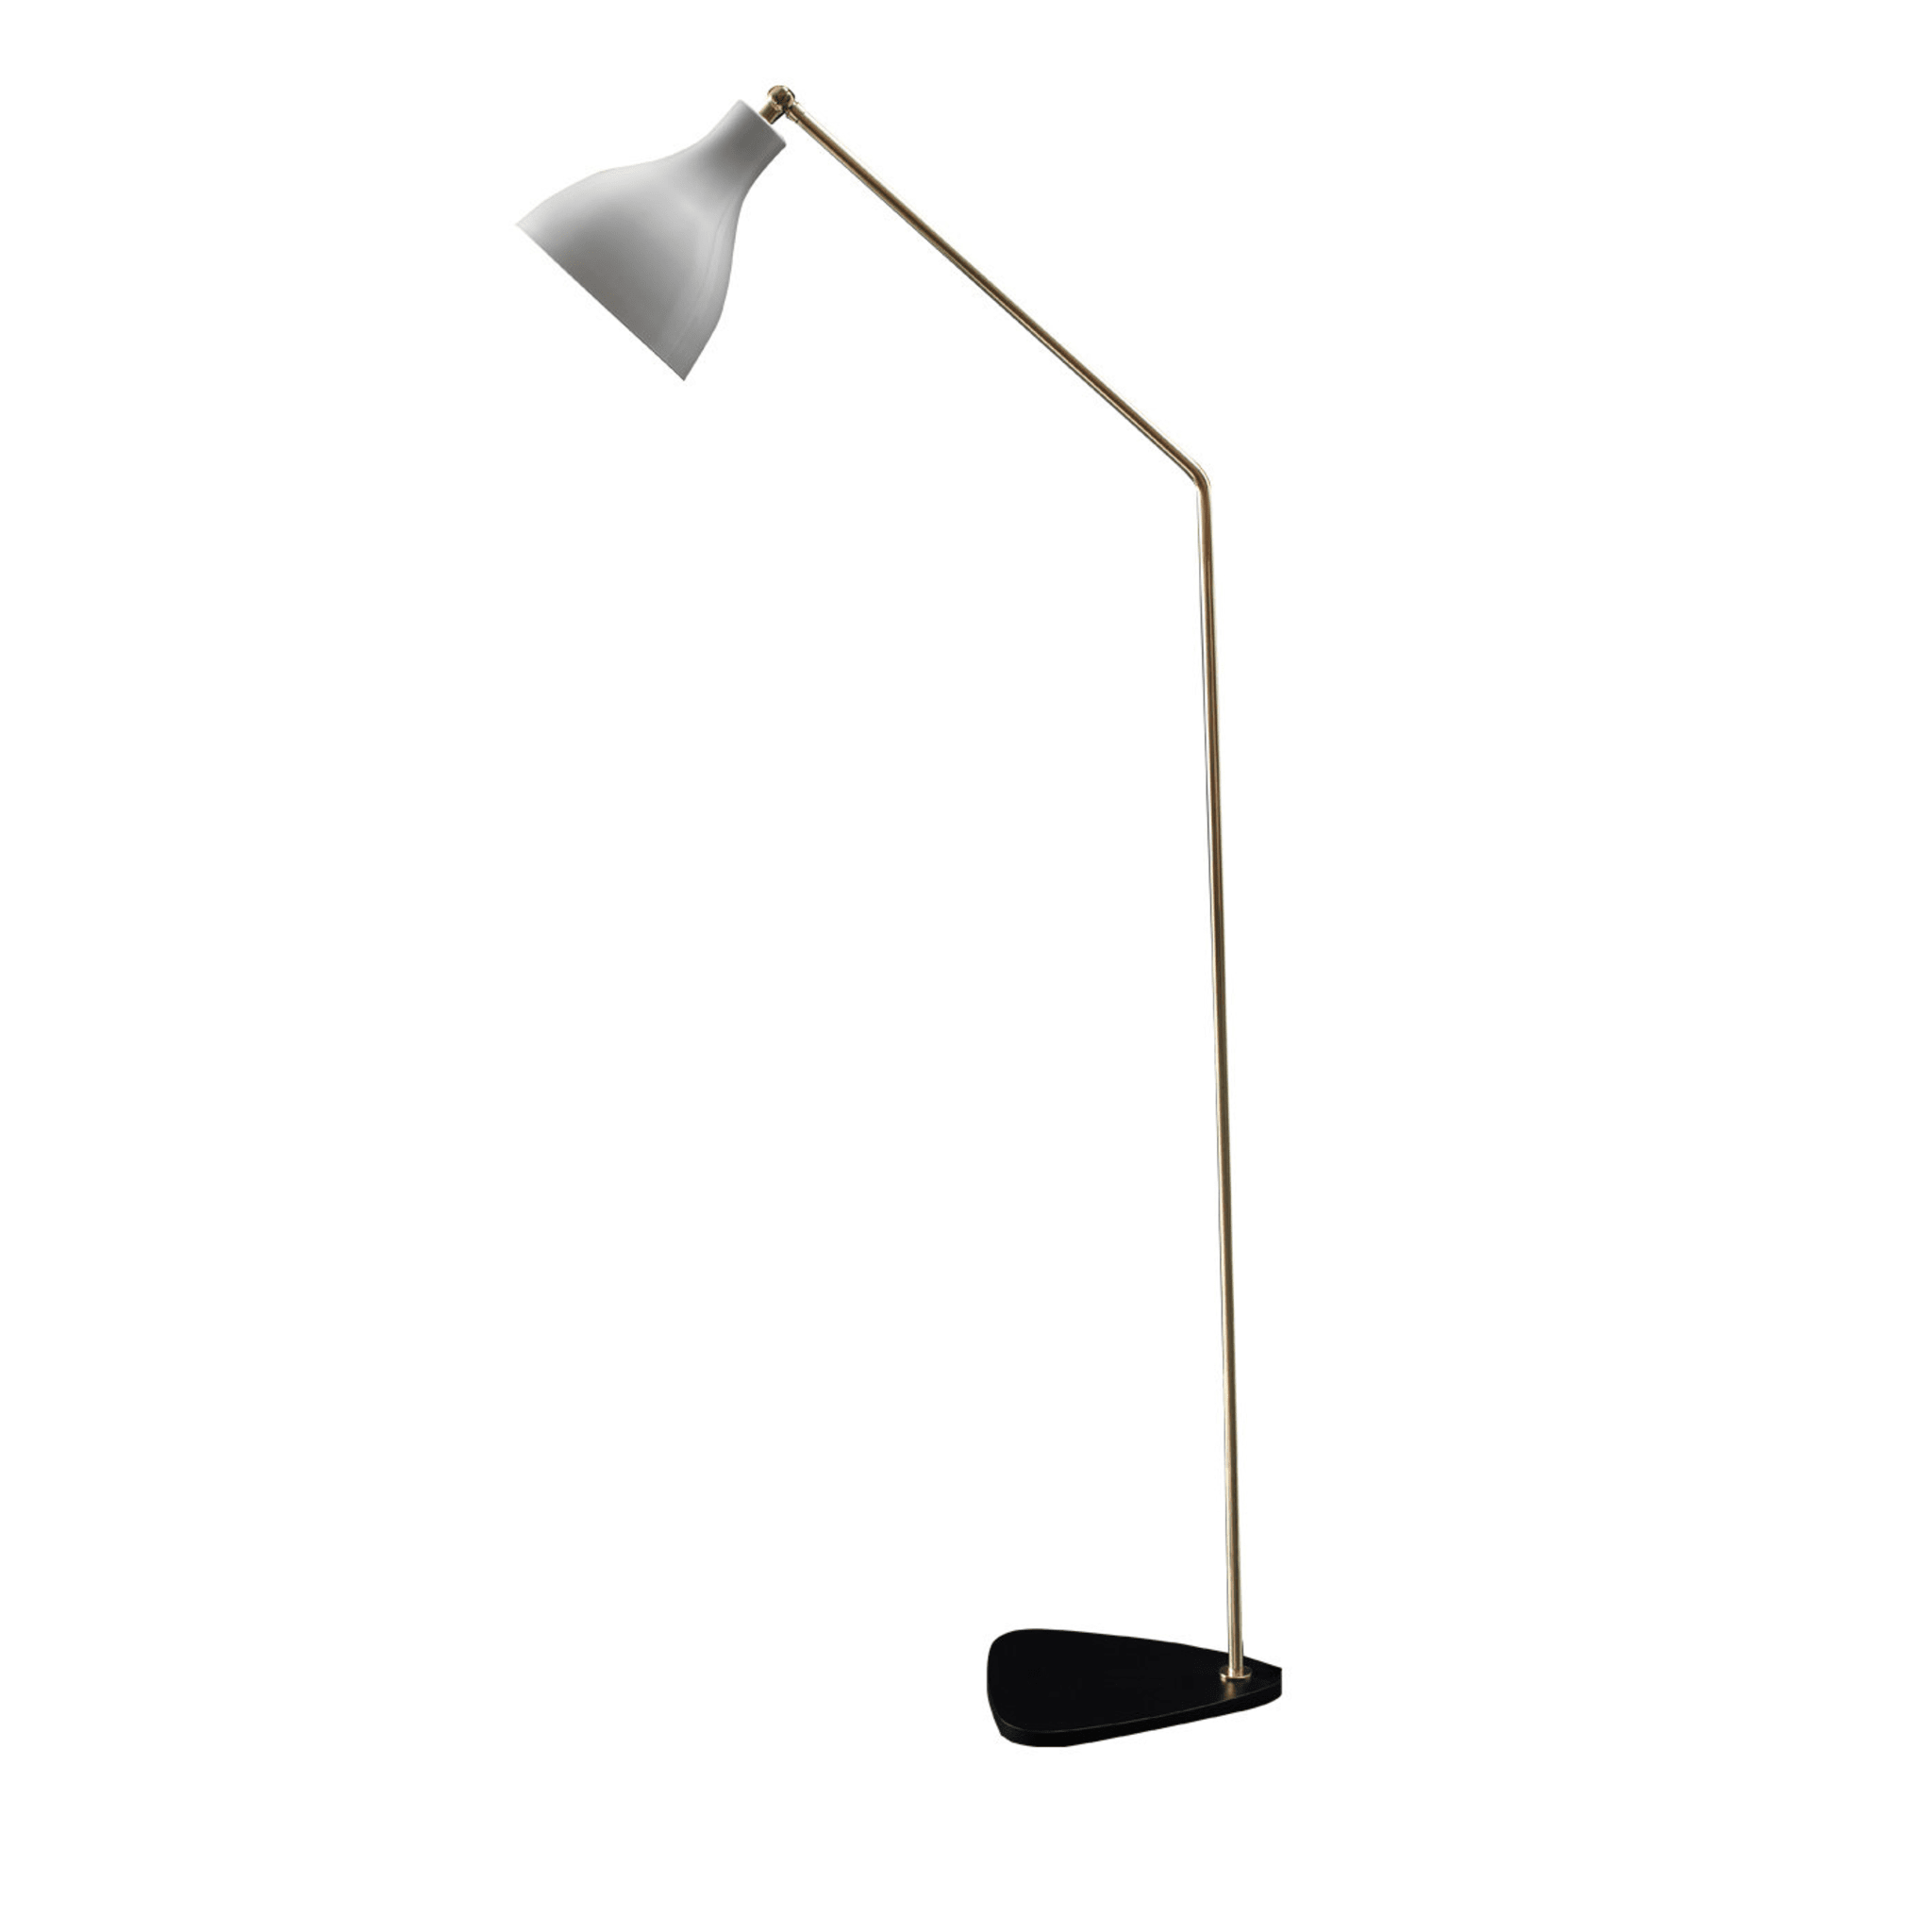 Lady V. Upright floor lamp - Main view